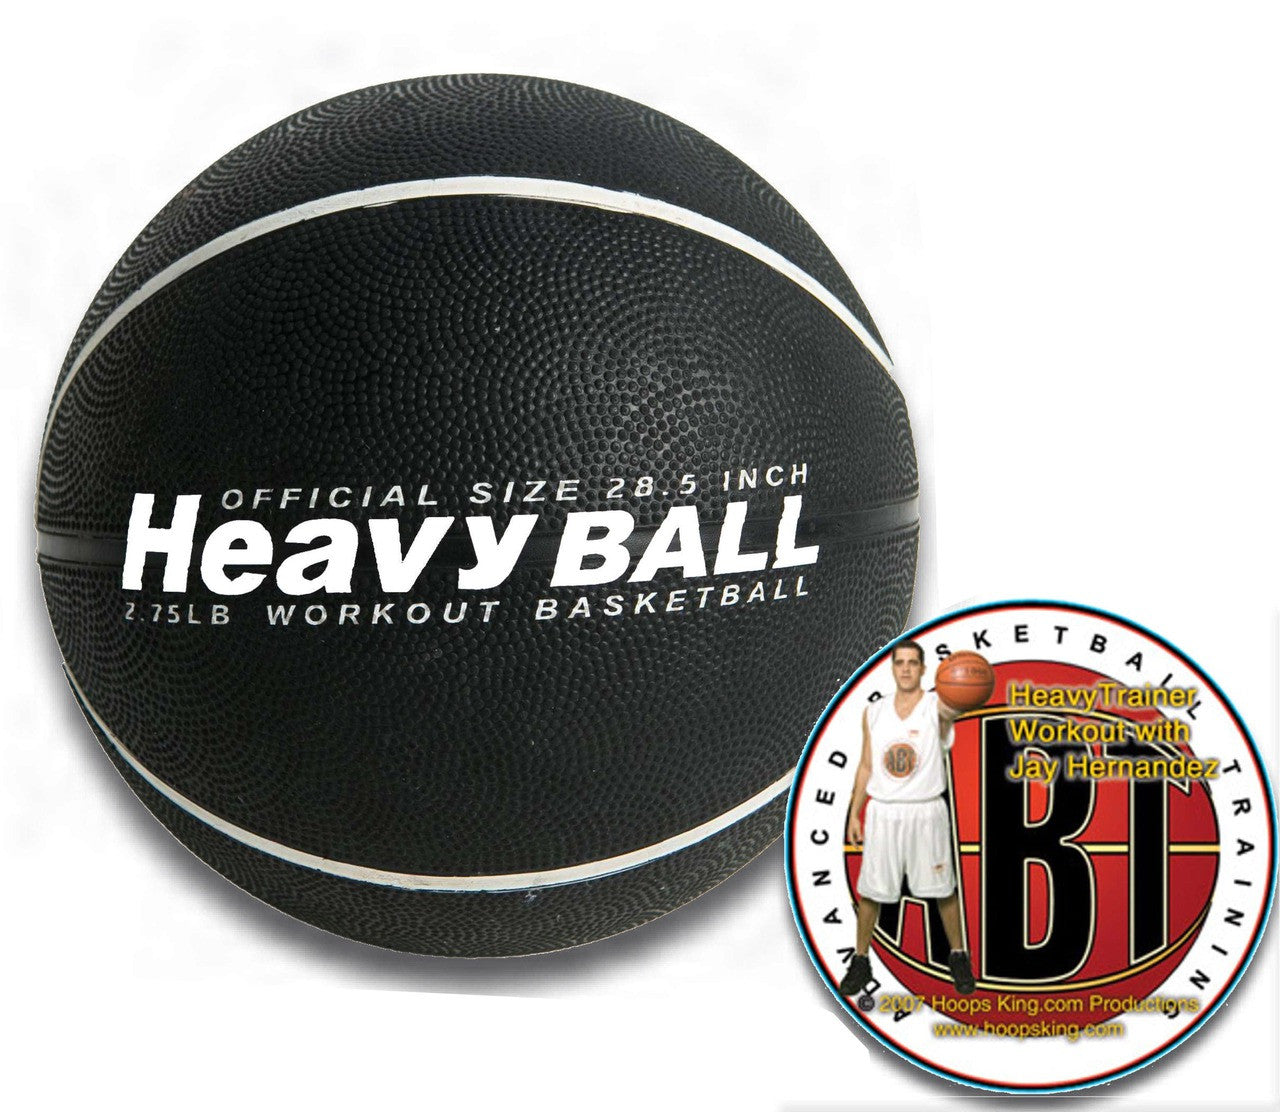 Weighted Basketball comes in 29.5" and 28.5"